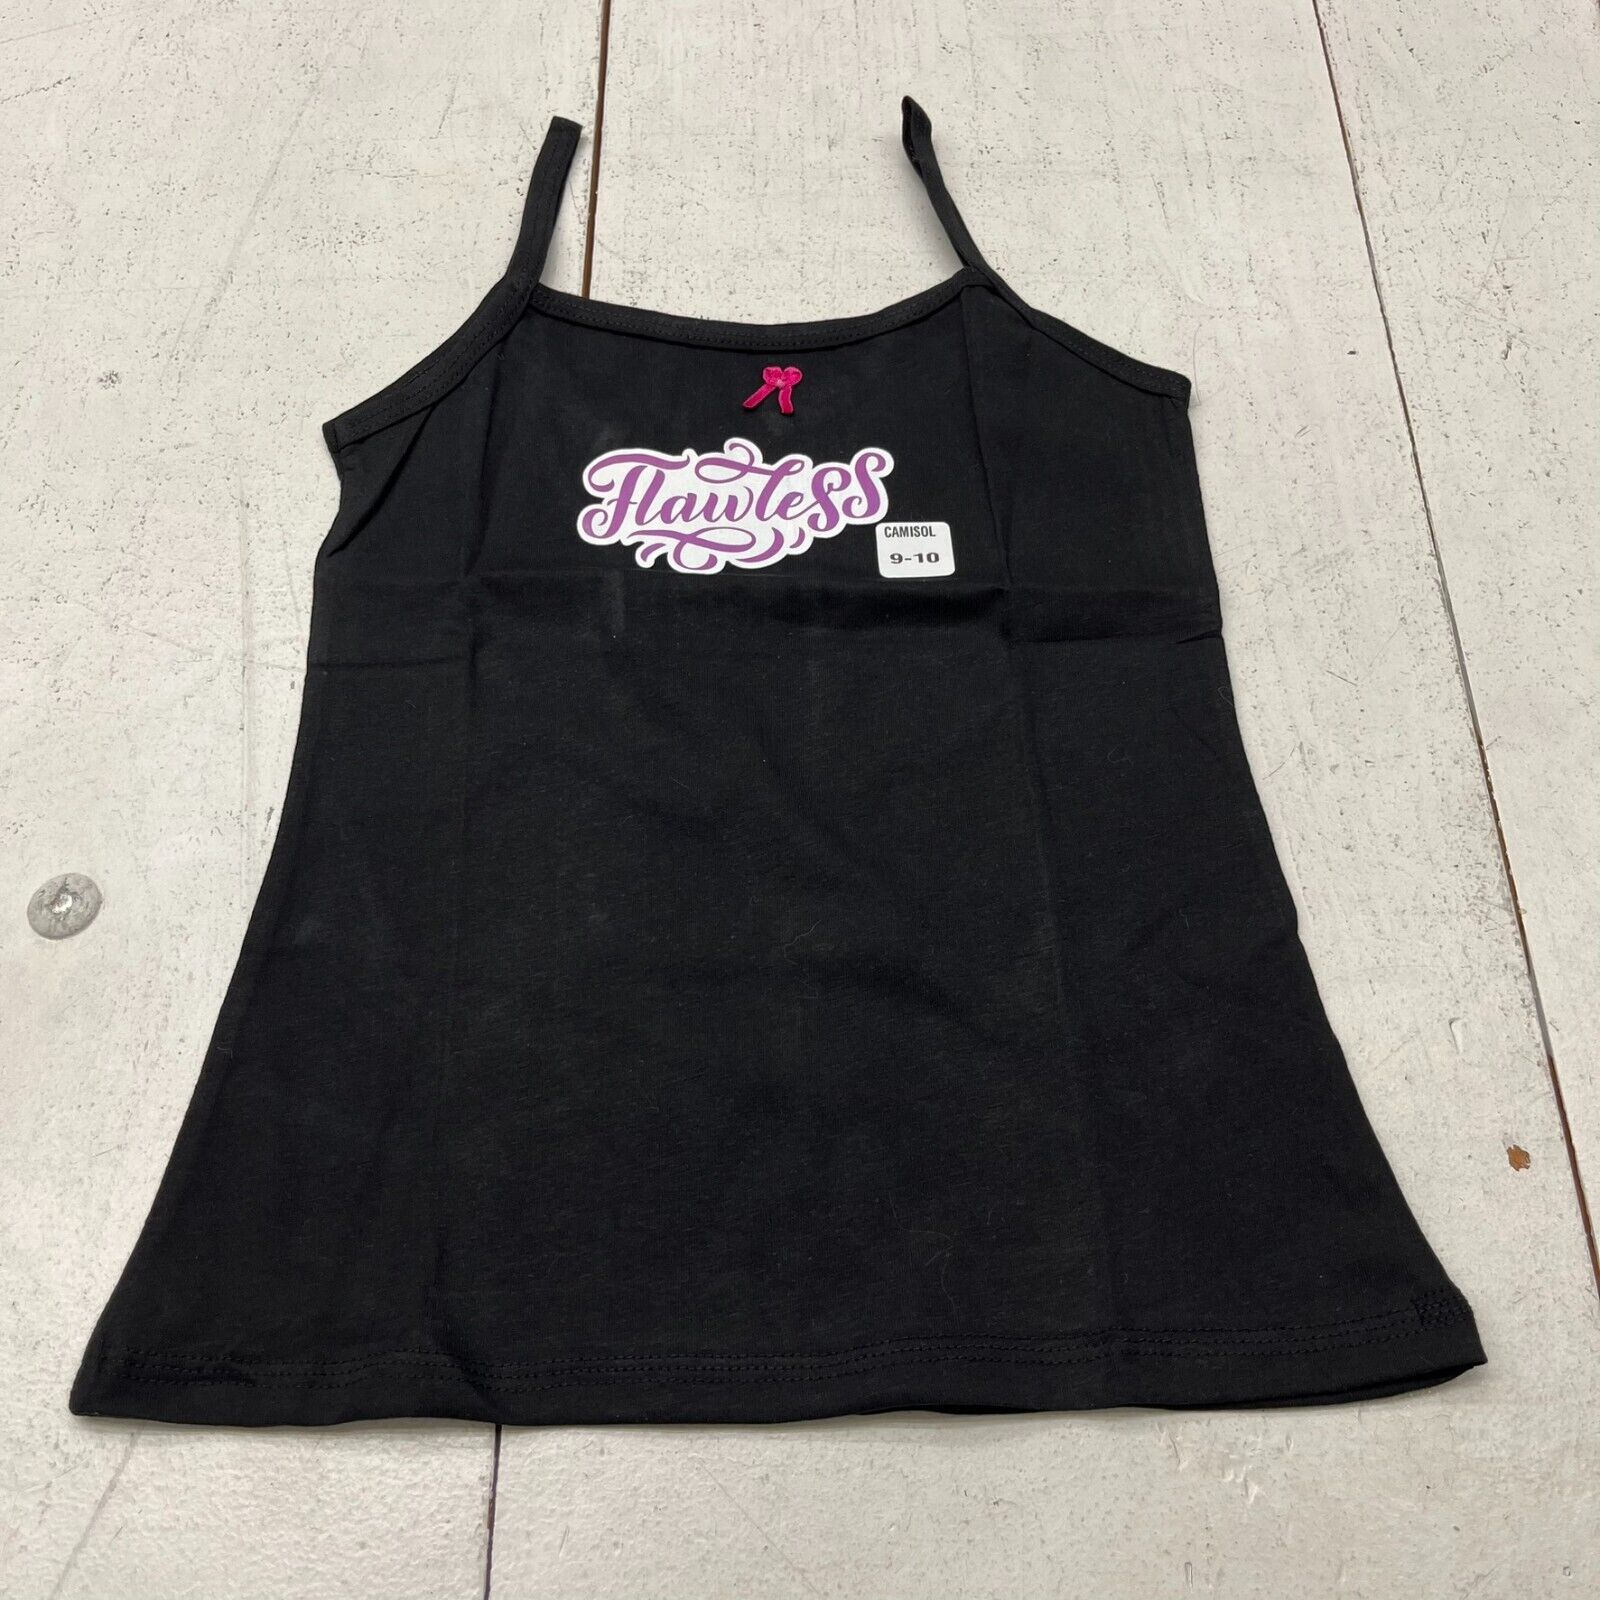 D'chica Black "Flawless" Tank Top Girls Size 9-10 NEW